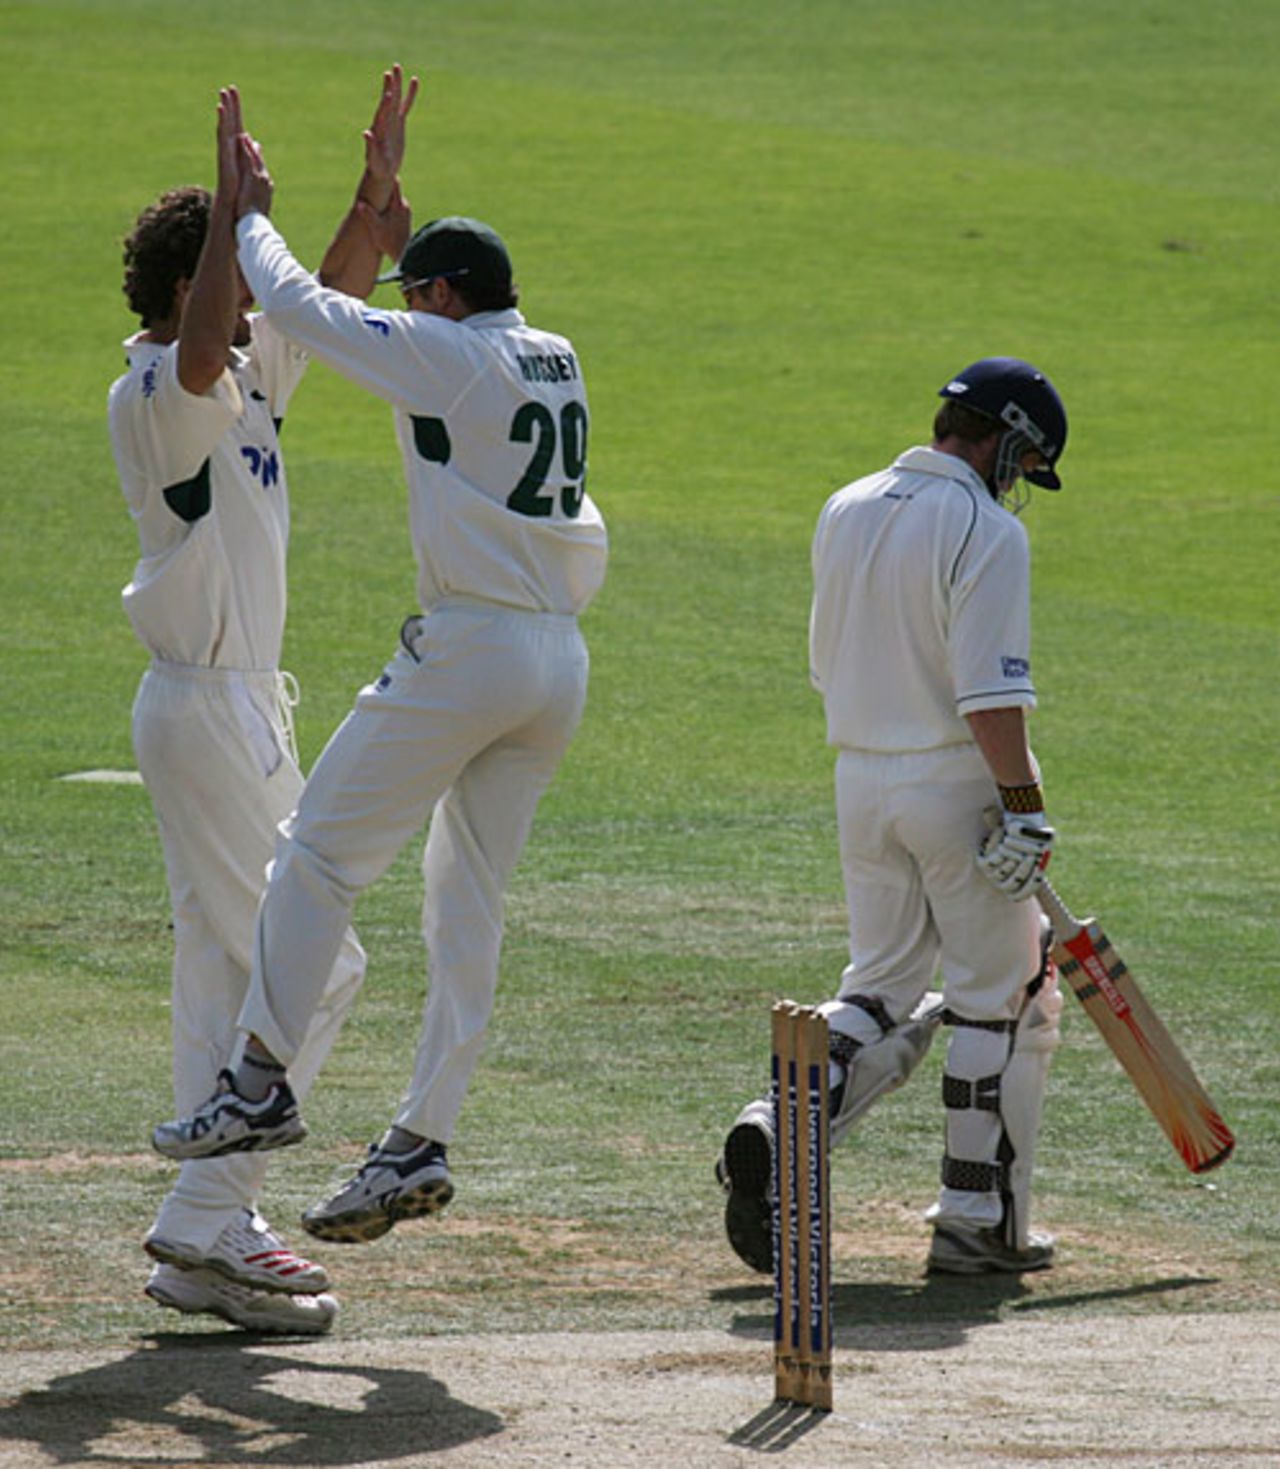 Charlie Shreck celebrates dismissing Eoin Morgan - the first of three wickets in five balls, Middlesex v Nottinghamshire, Lord's, September 6, 2006